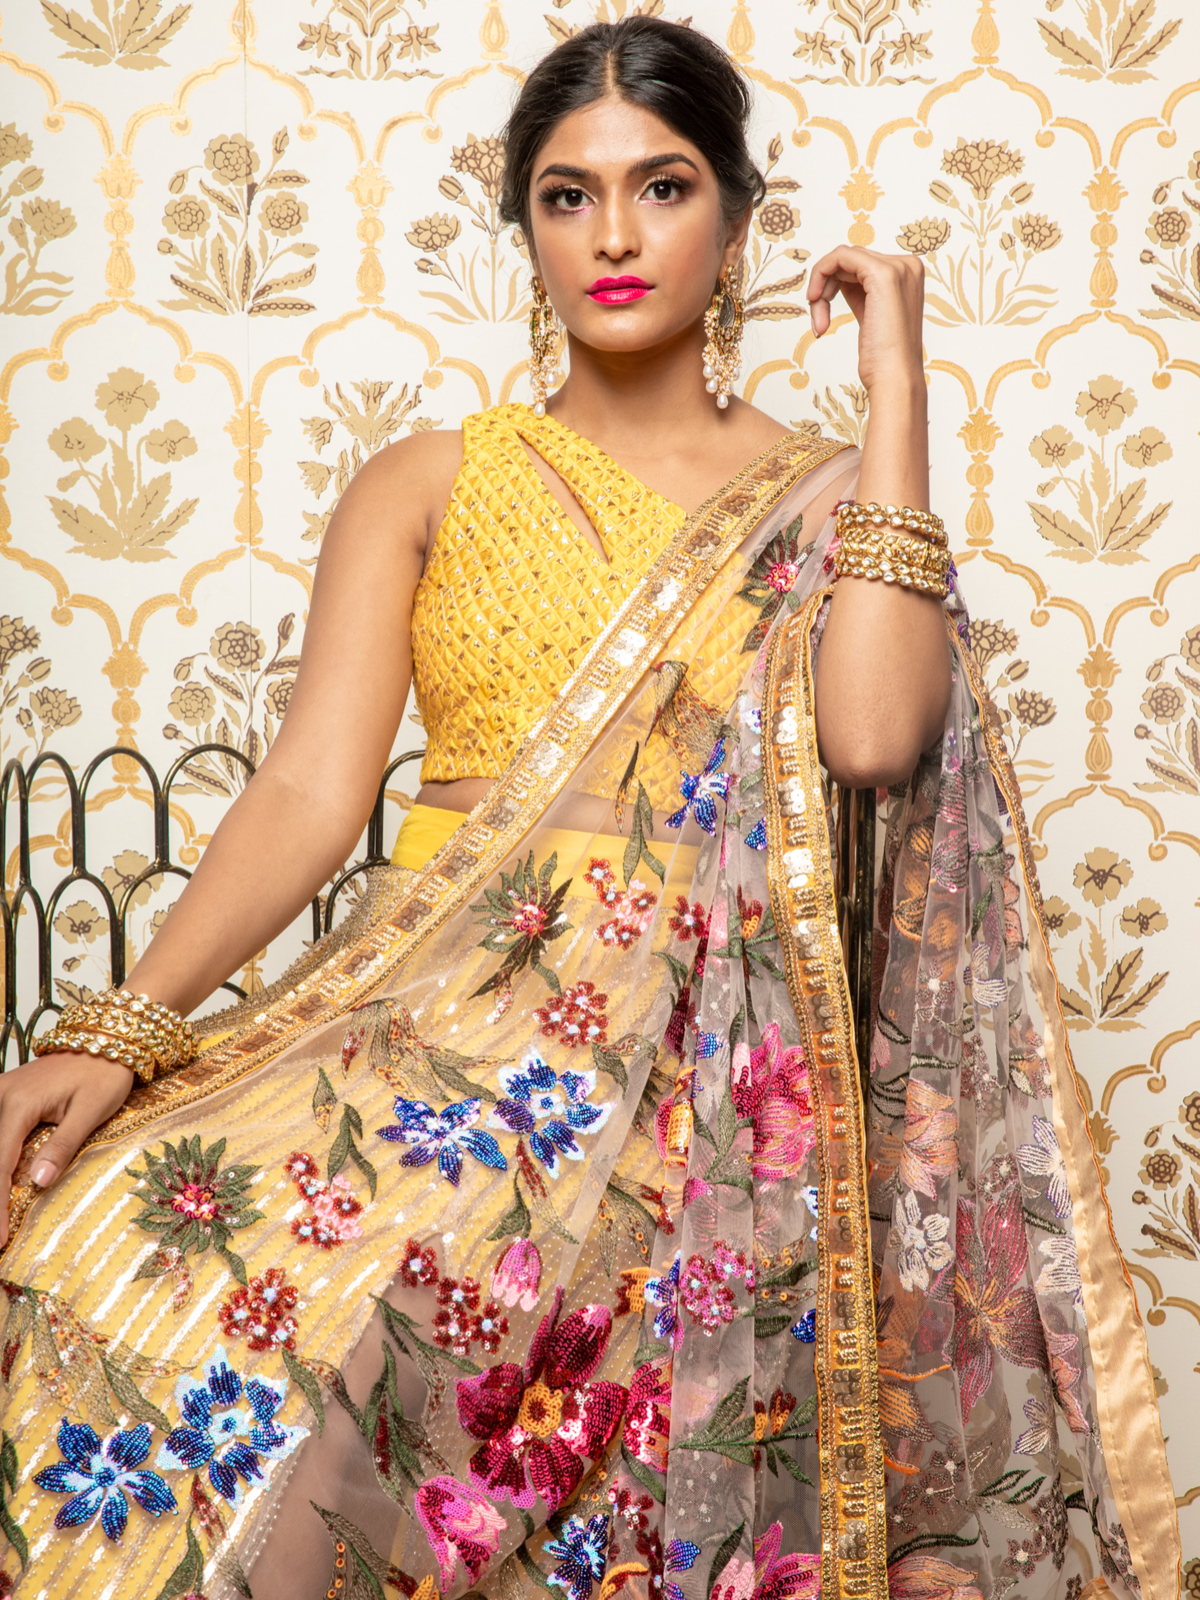 Yellow Diamond Jacquard Top and Striped Beaded Sequin Skirt with Floral Sequin Dupatta - Mehndi and Haldi Outfit Ideas - Harleen Kaur Blog